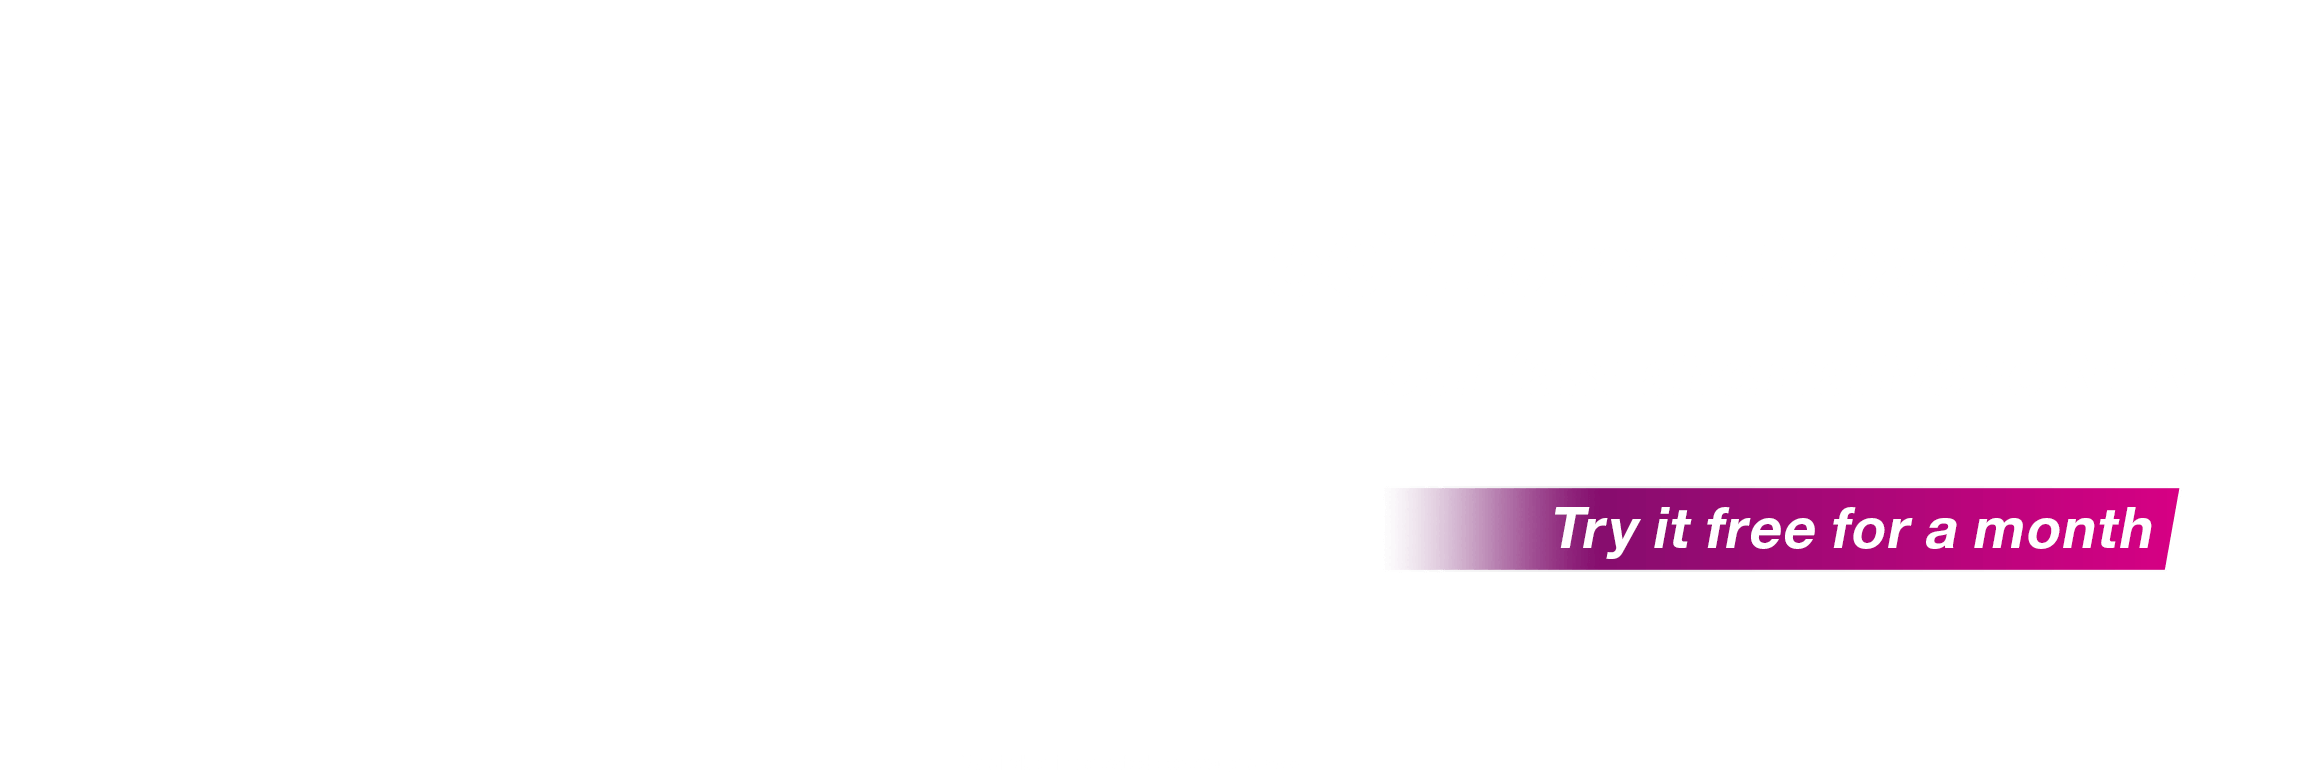 TPG 5G Home Broadband | Our fast alternative to NBN